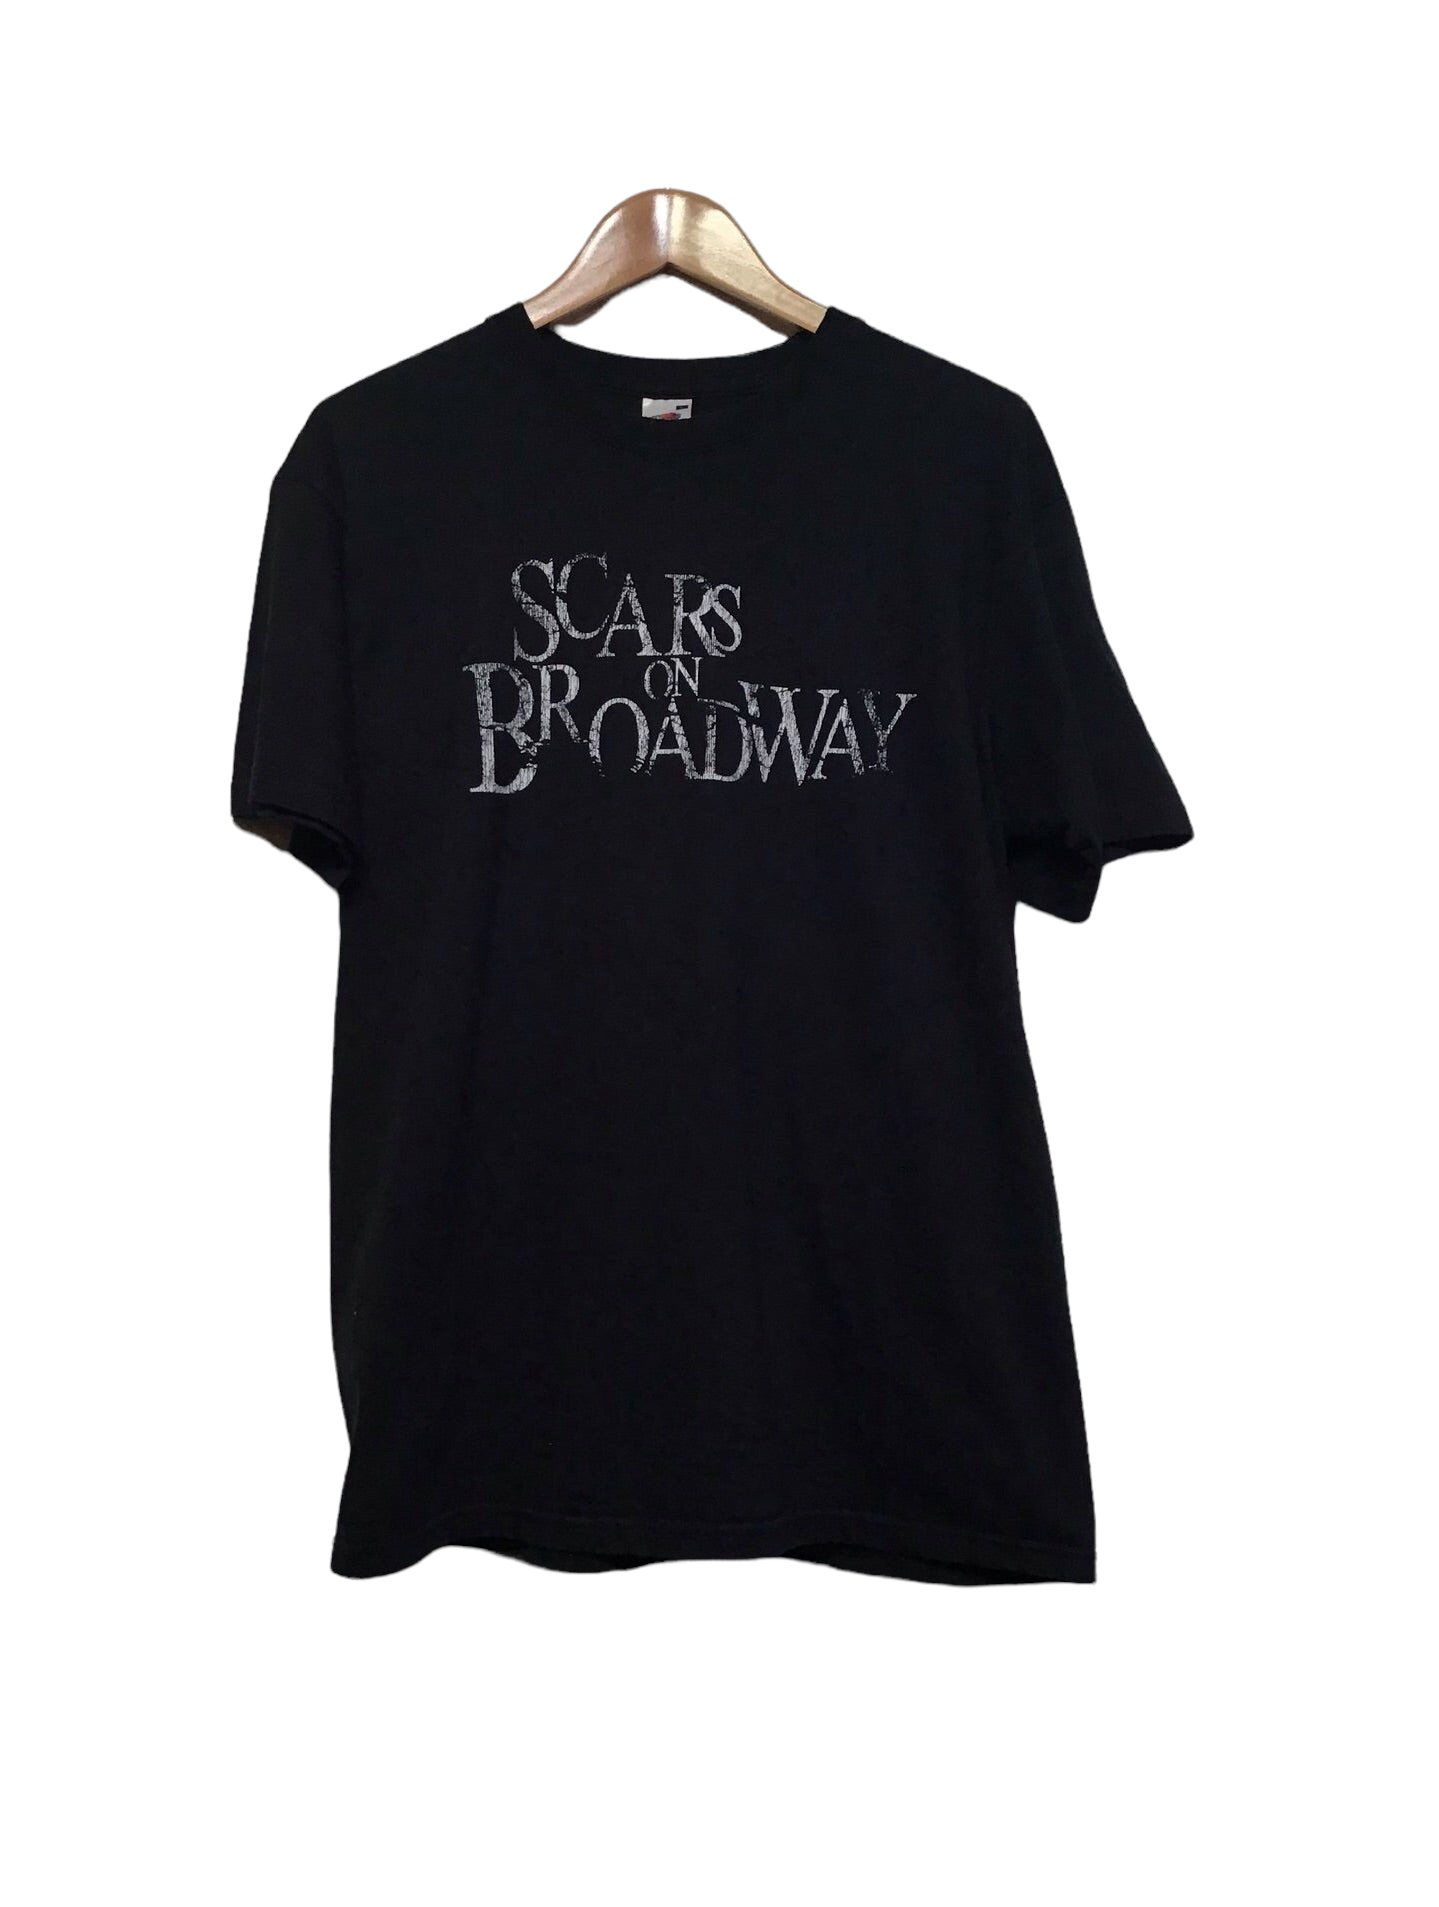 Scars On Broadway Graphic Tee (Size L)